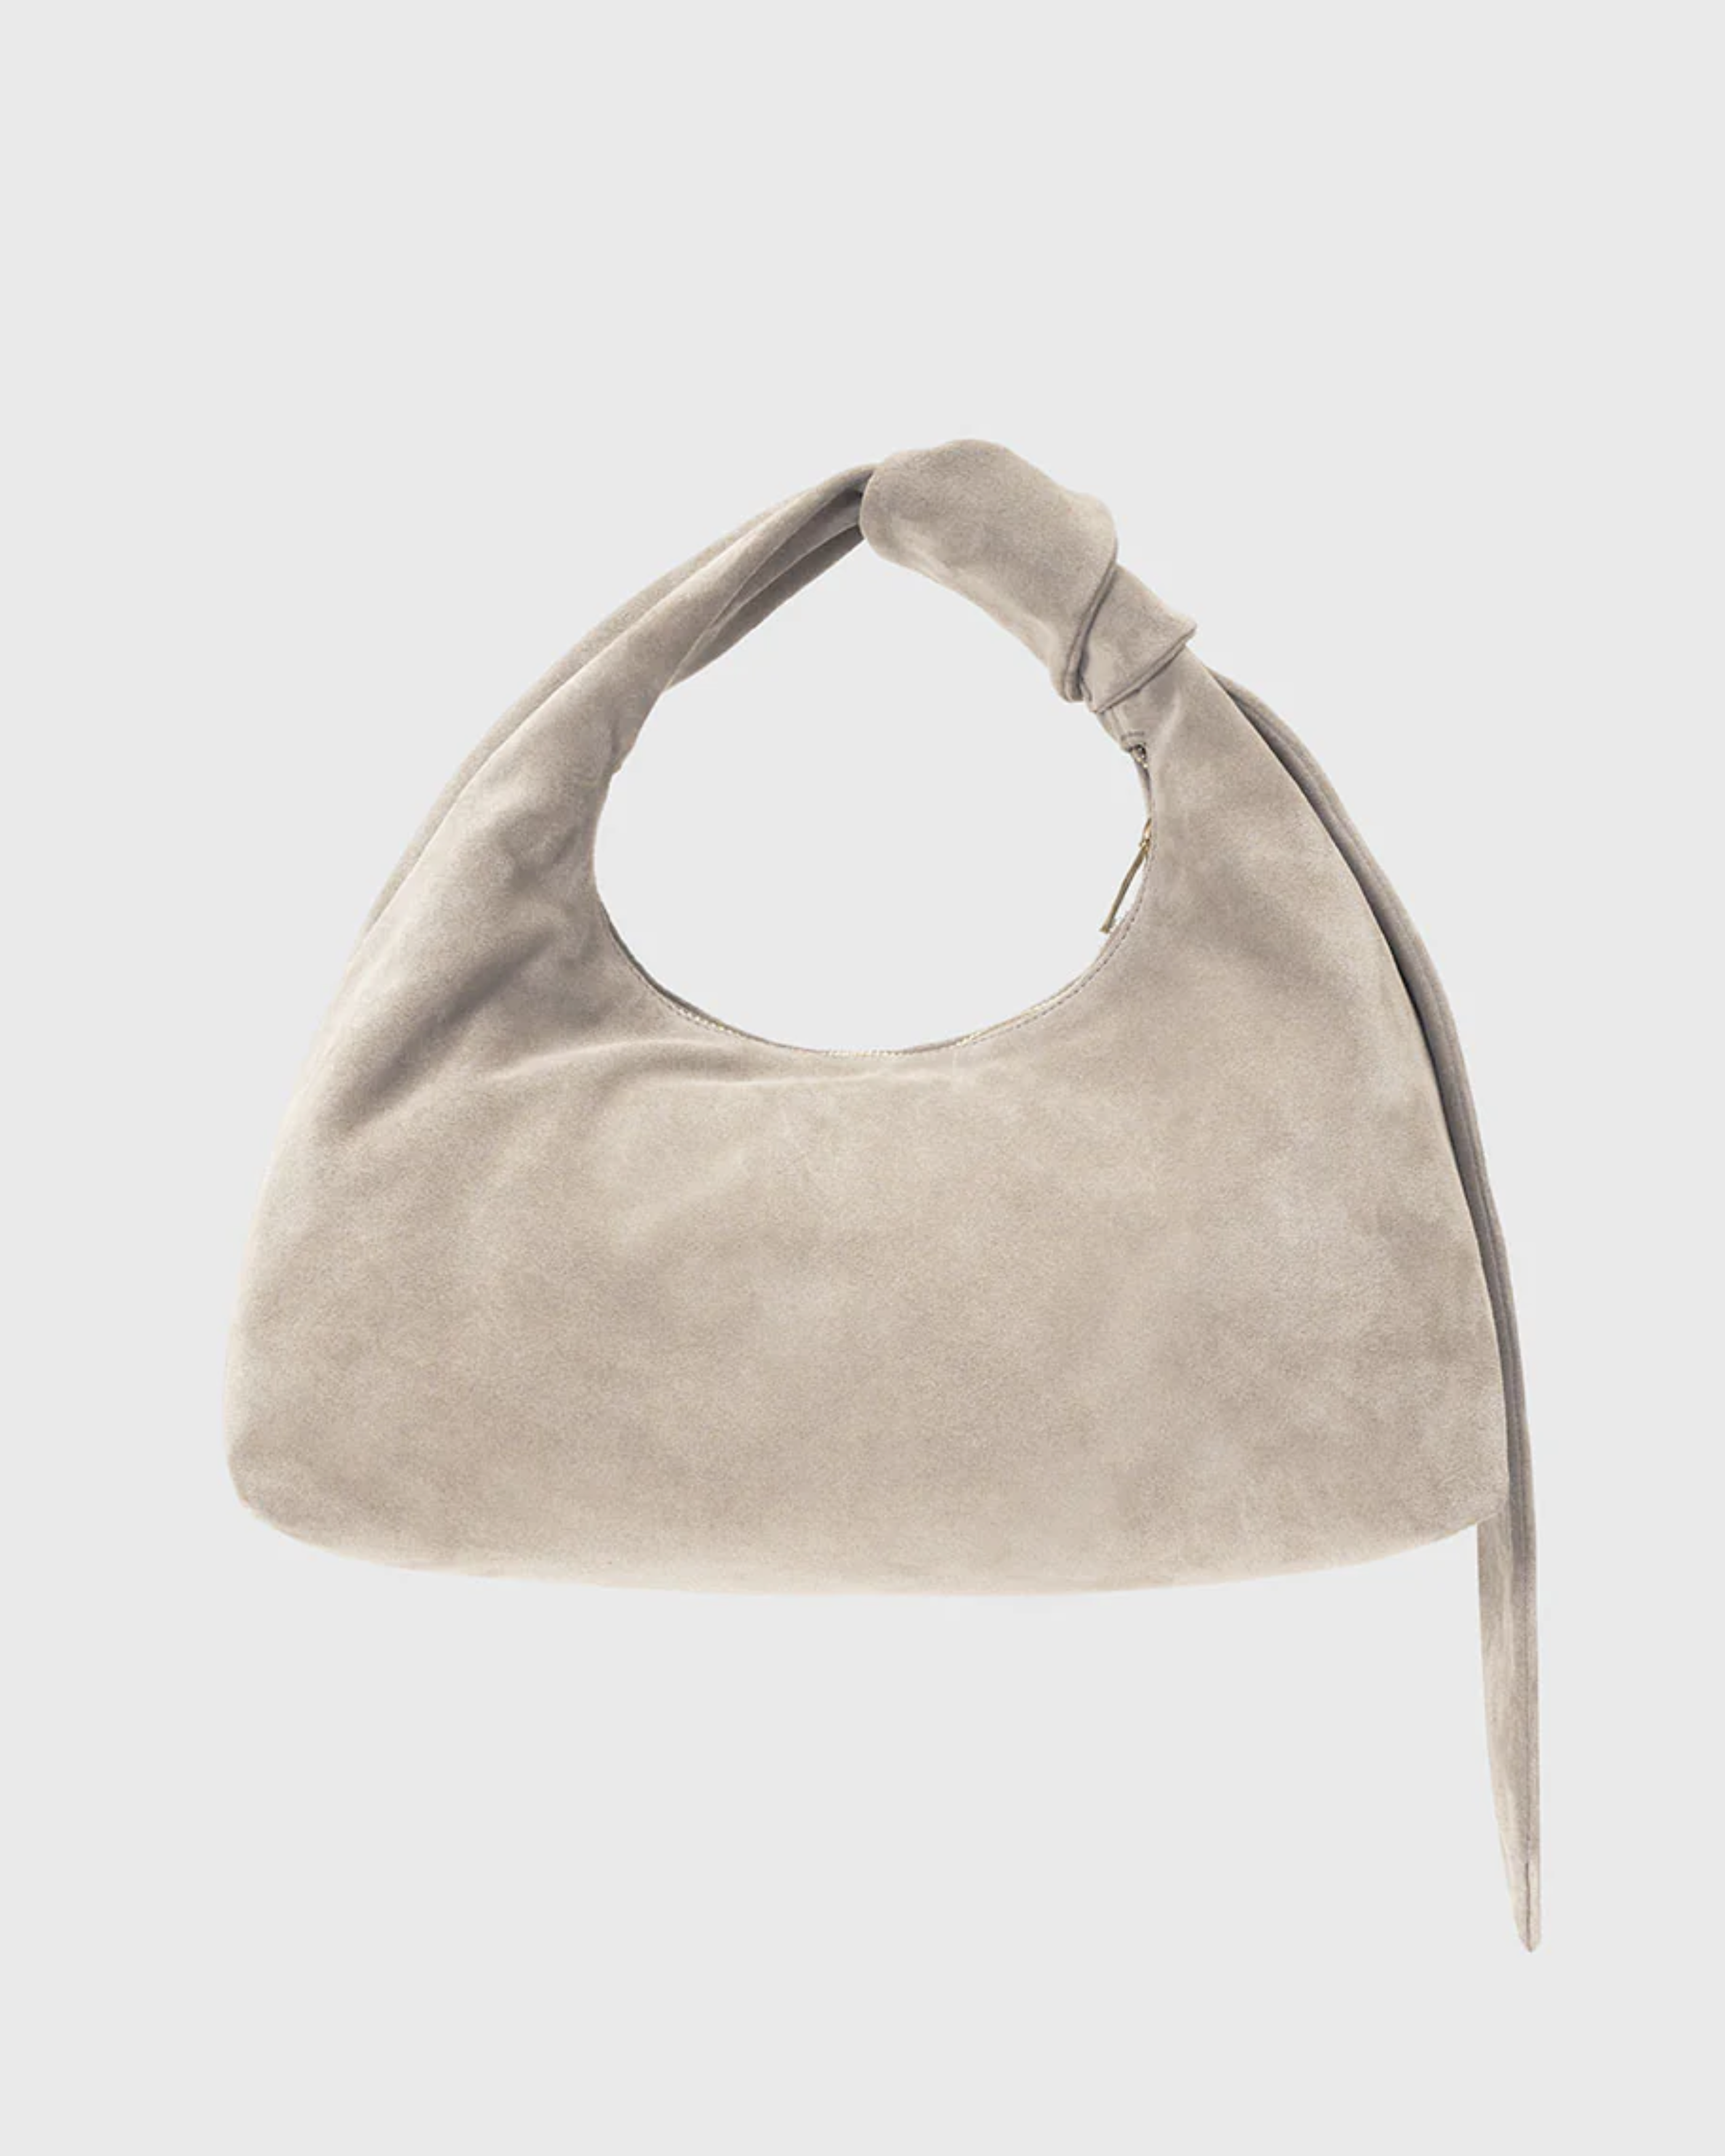 Anine Bing Grace Bag in Taupe Suede